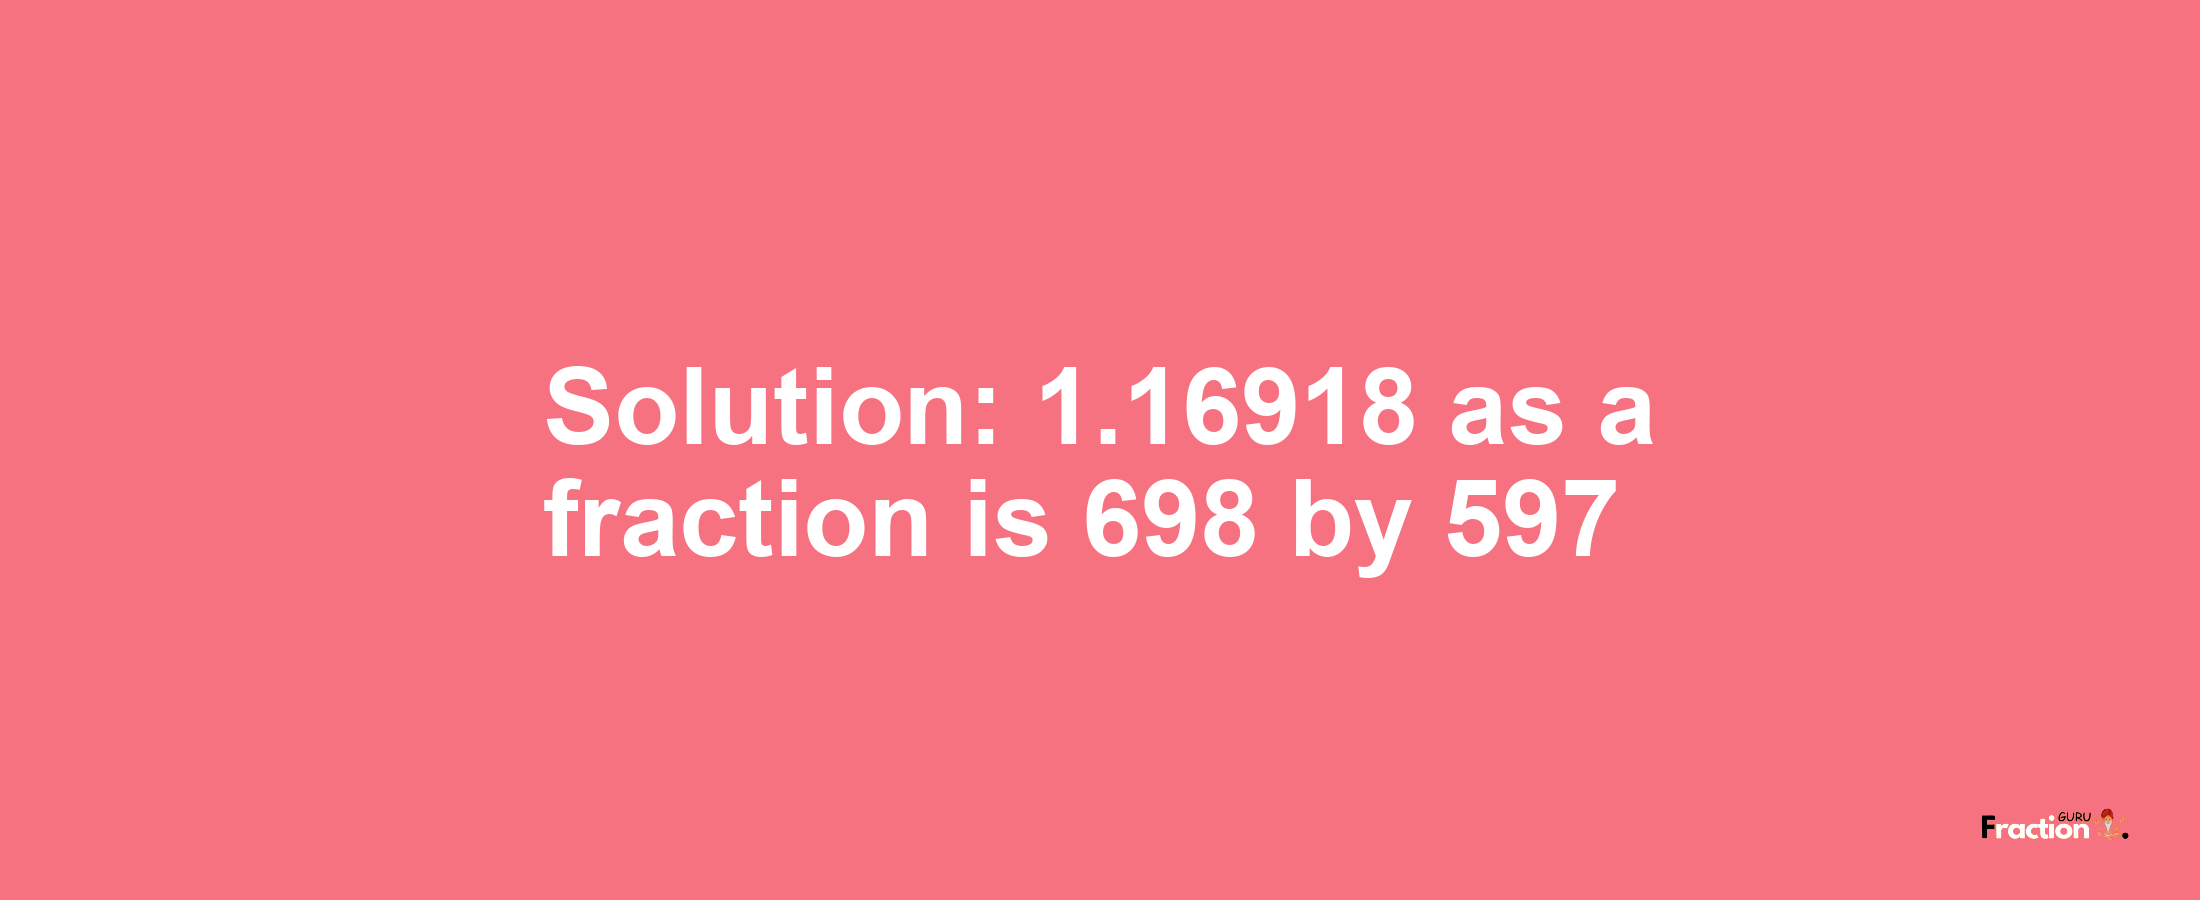 Solution:1.16918 as a fraction is 698/597